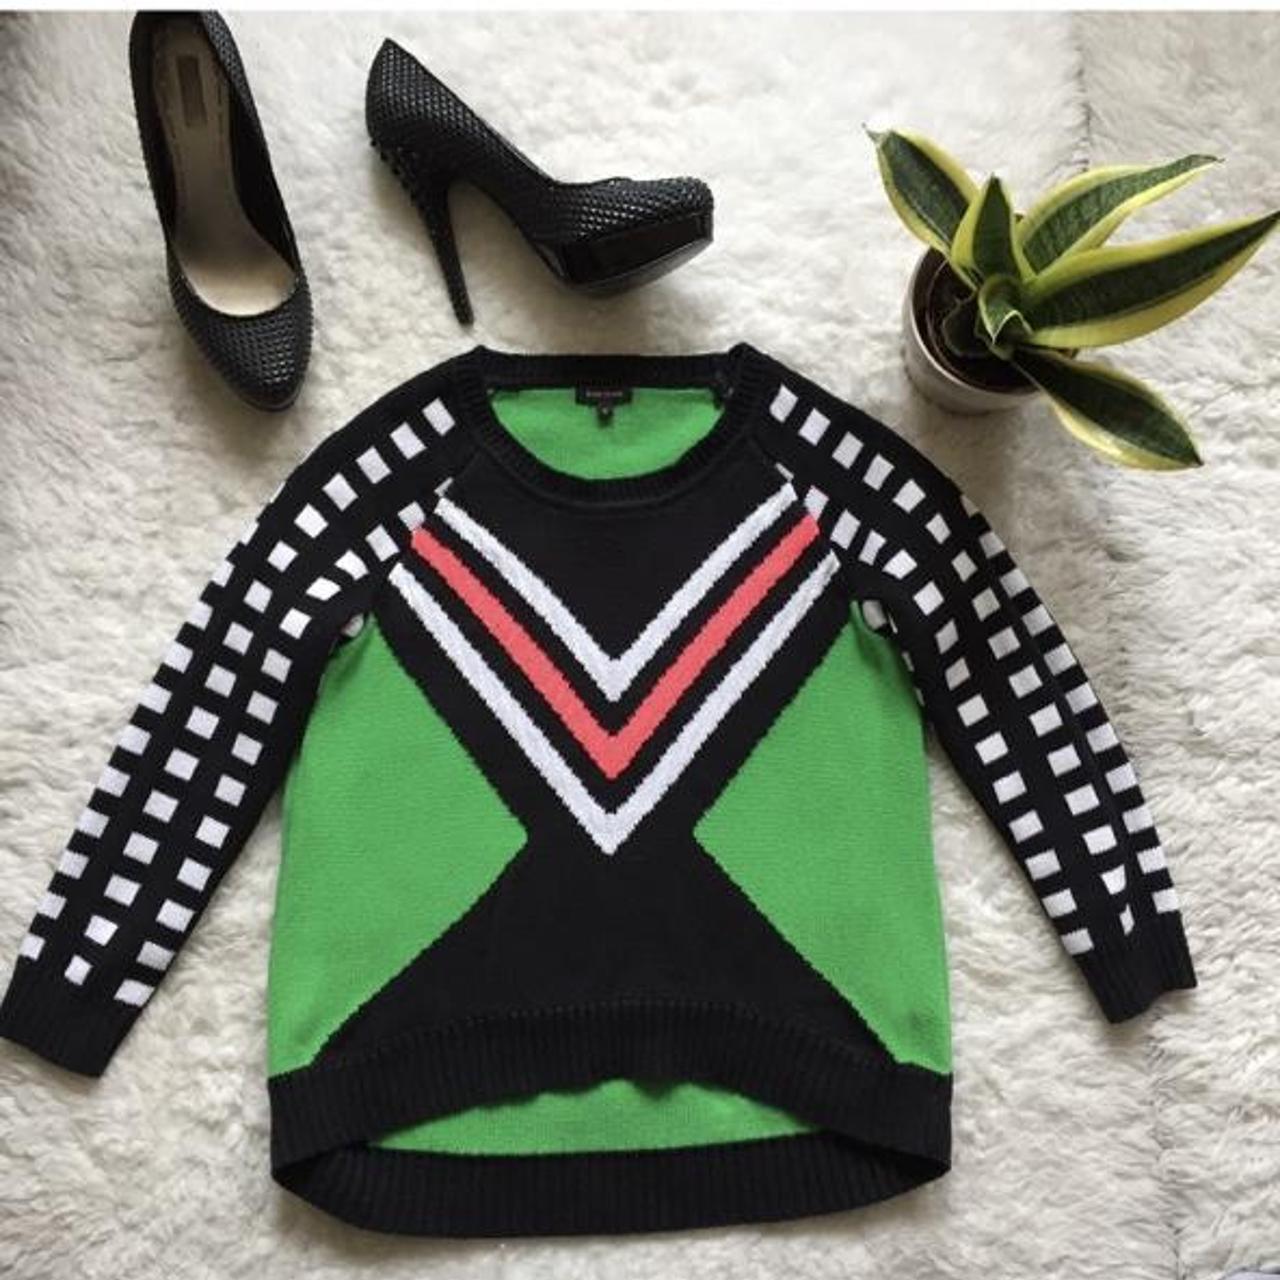 River Island Women's Green and Black